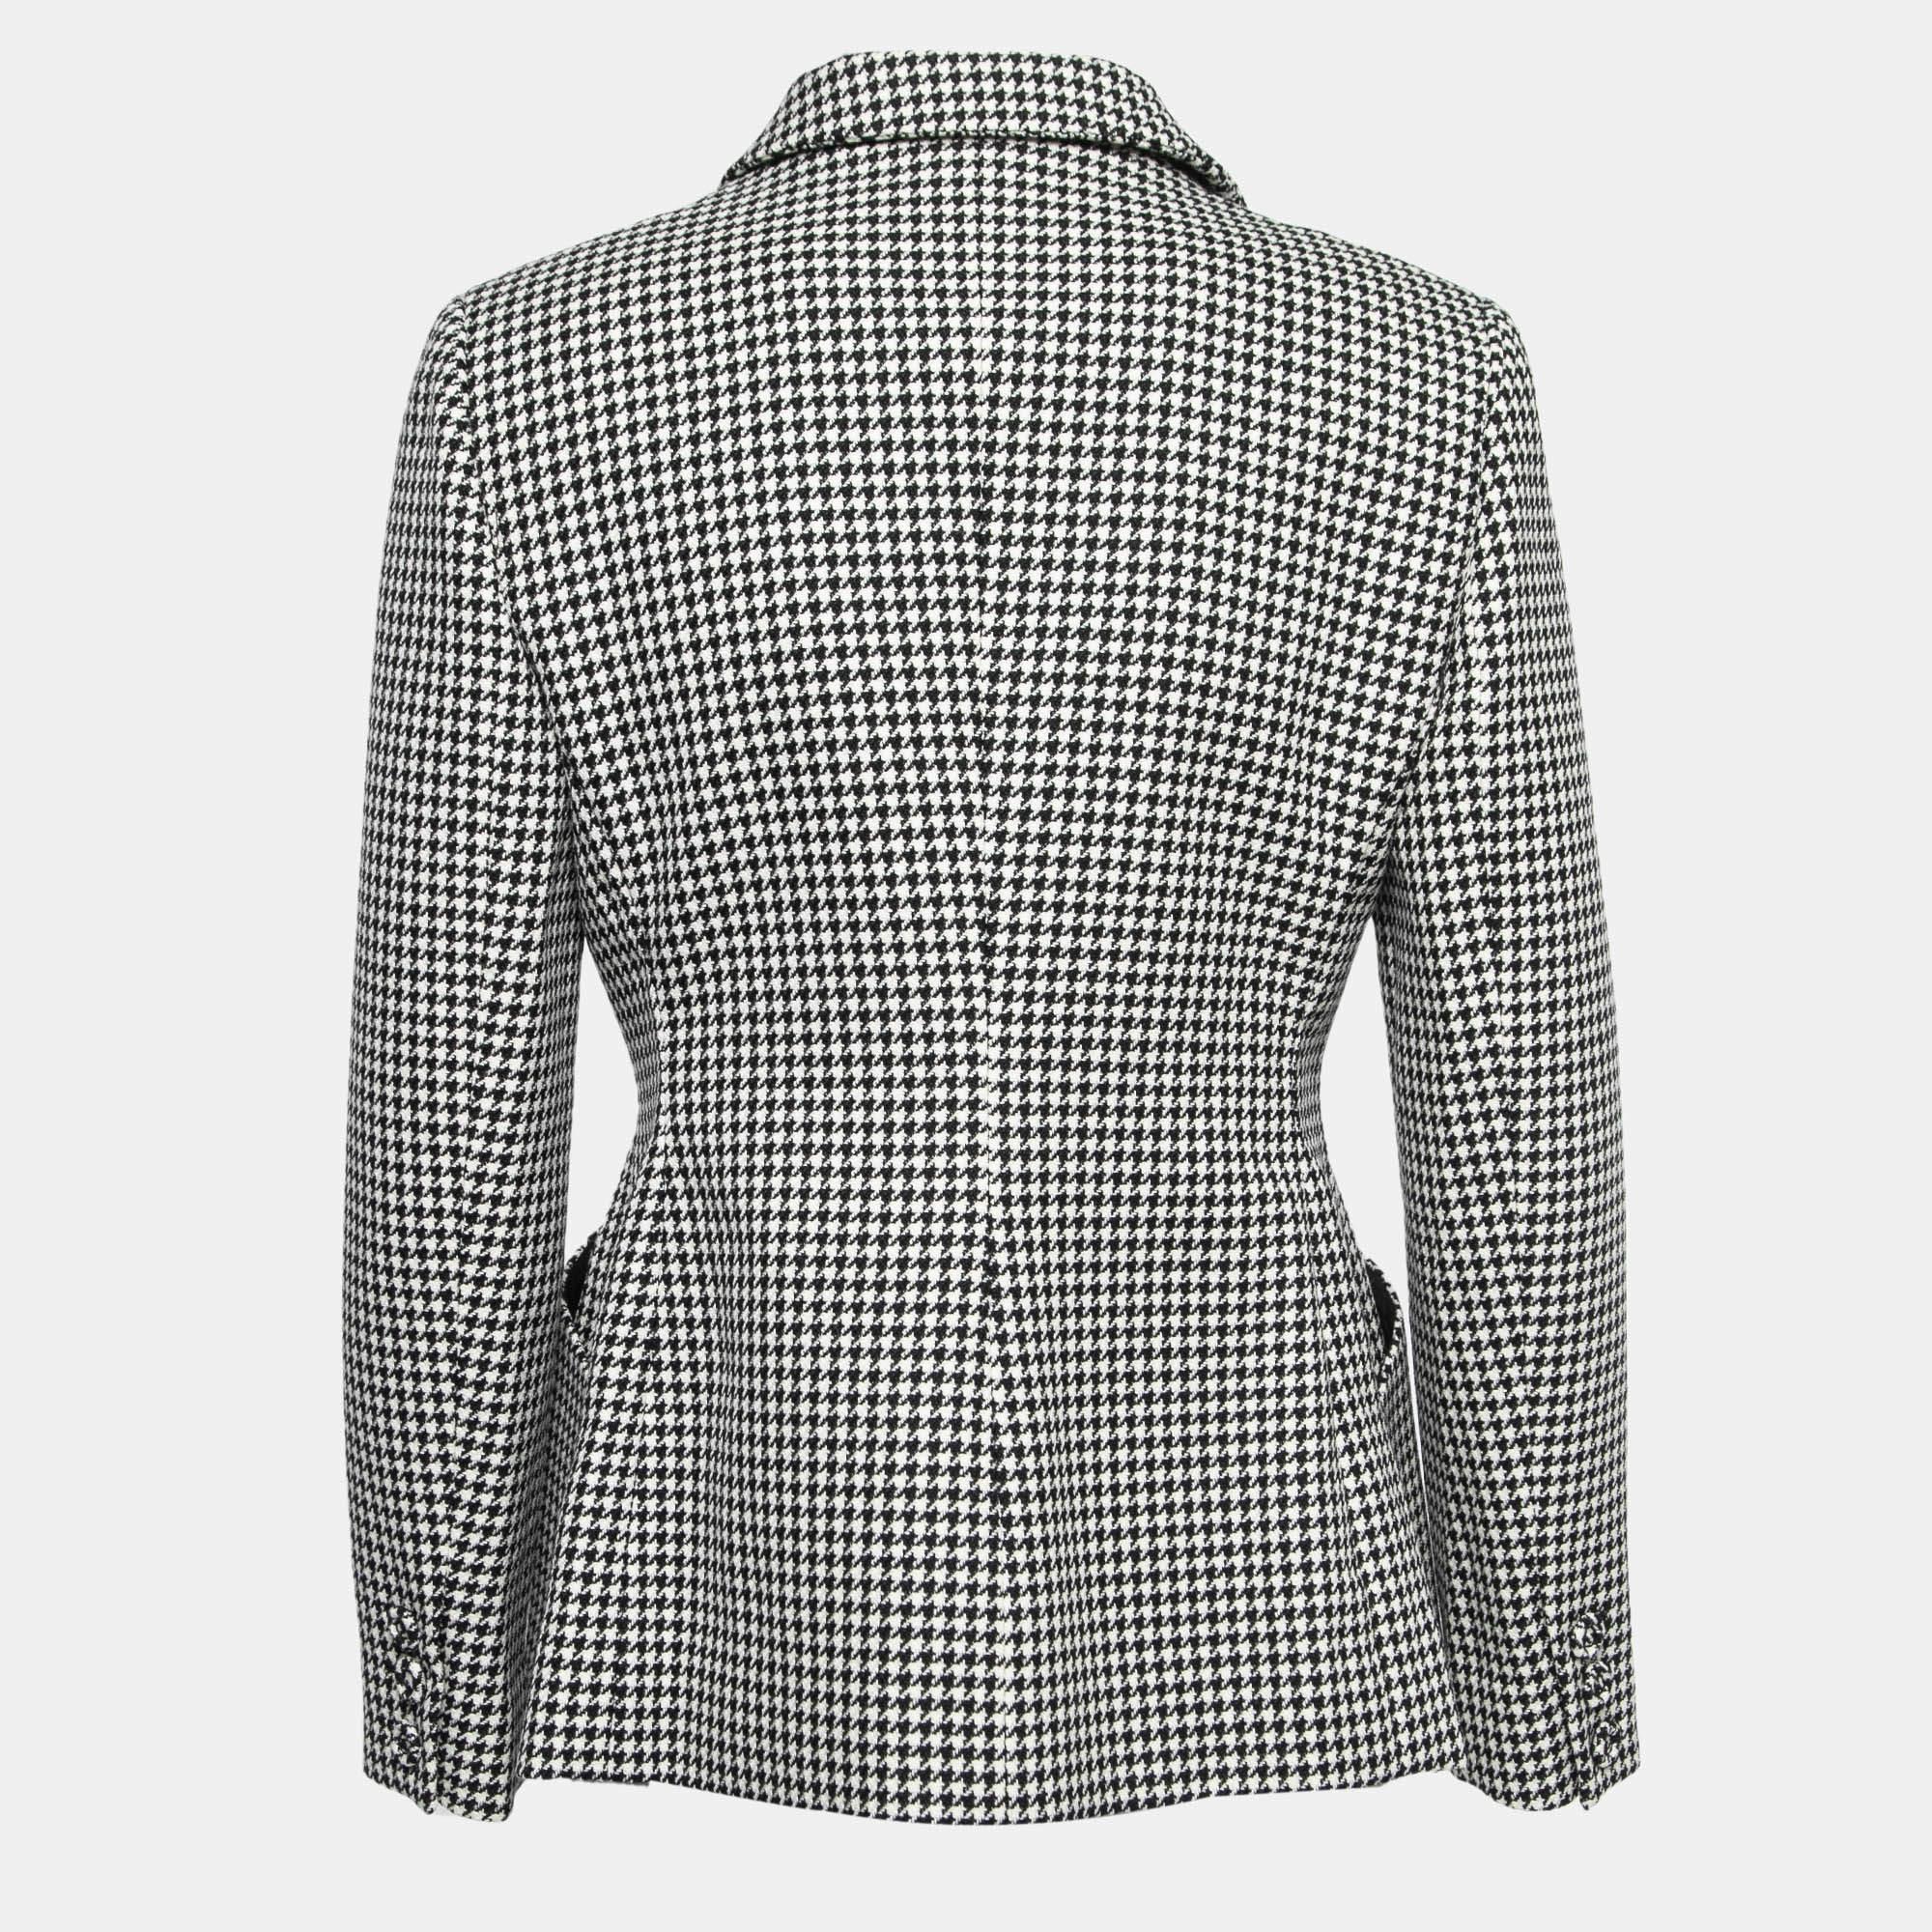 Women's Christian Dior Black/White Houndstooth Patterned Wool 30 Montaigne Bar Jacket M